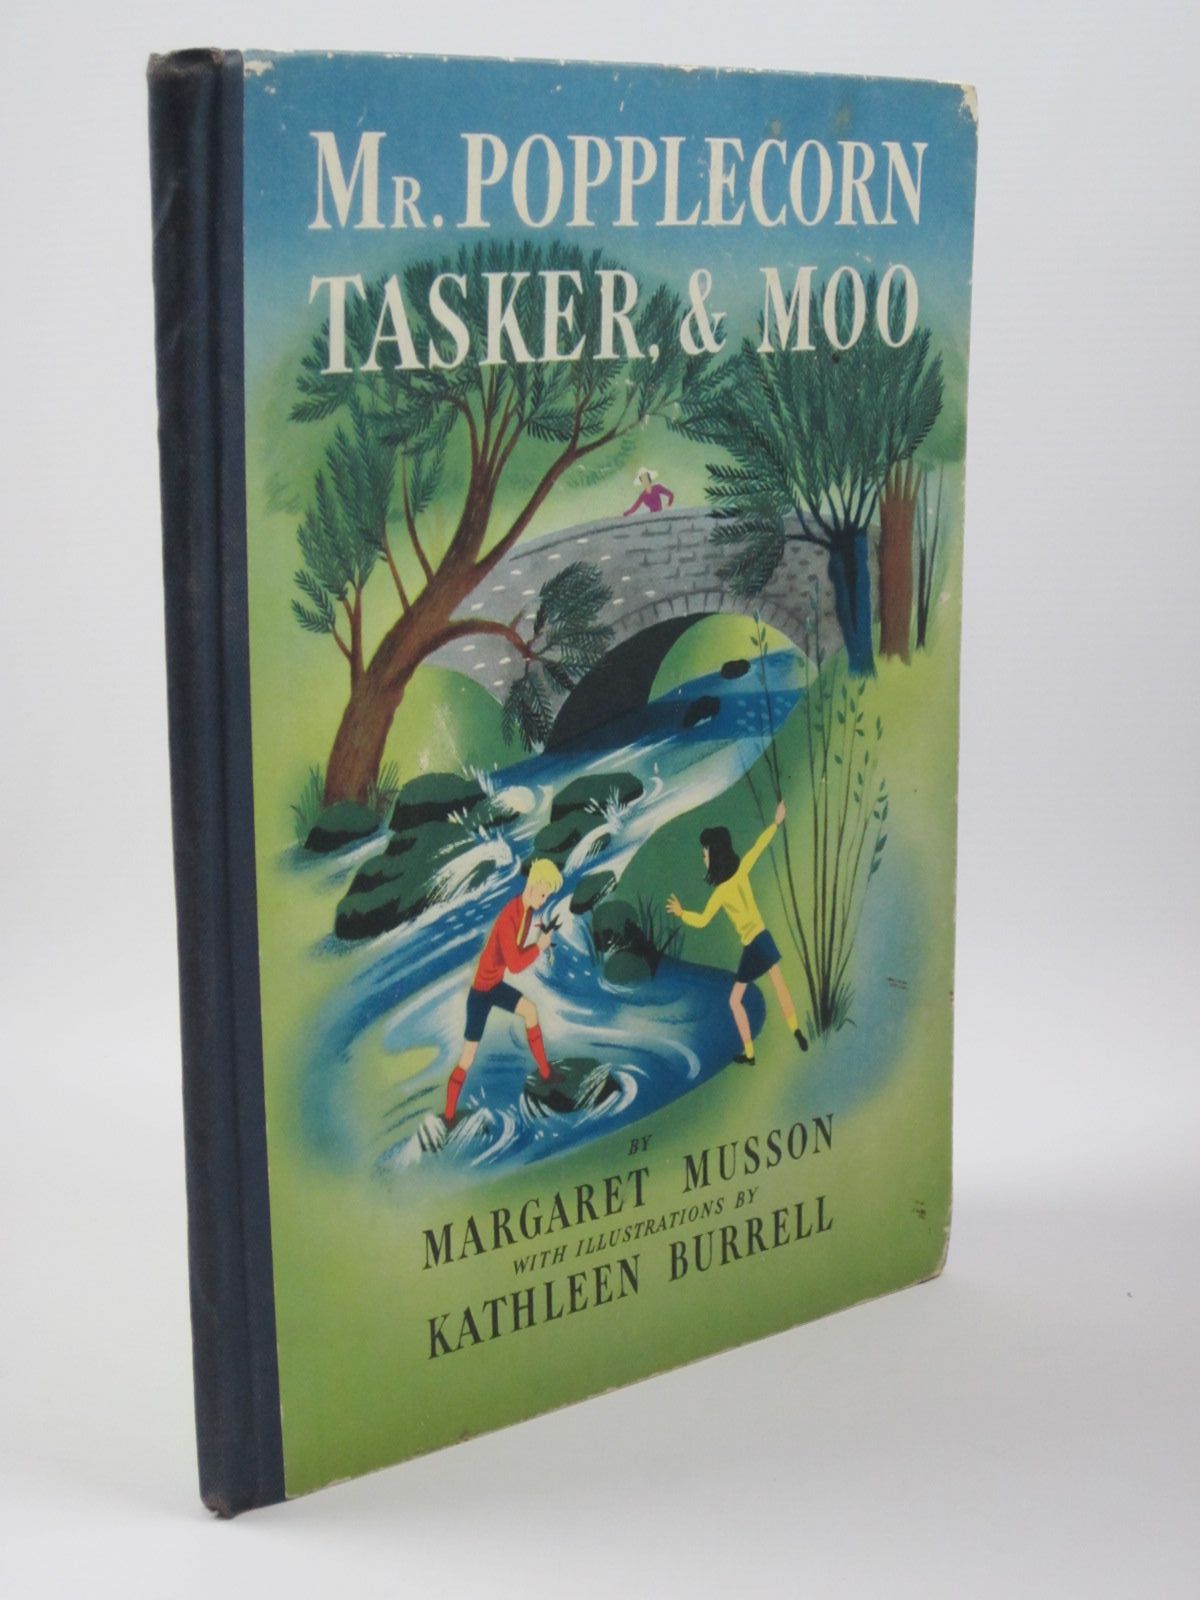 Photo of MR. POPPLECORN TASKER AND MOO written by Musson, Margaret illustrated by Burrell, Kathleen published by George G. Harrap &amp; Co. Ltd. (STOCK CODE: 1401544)  for sale by Stella & Rose's Books